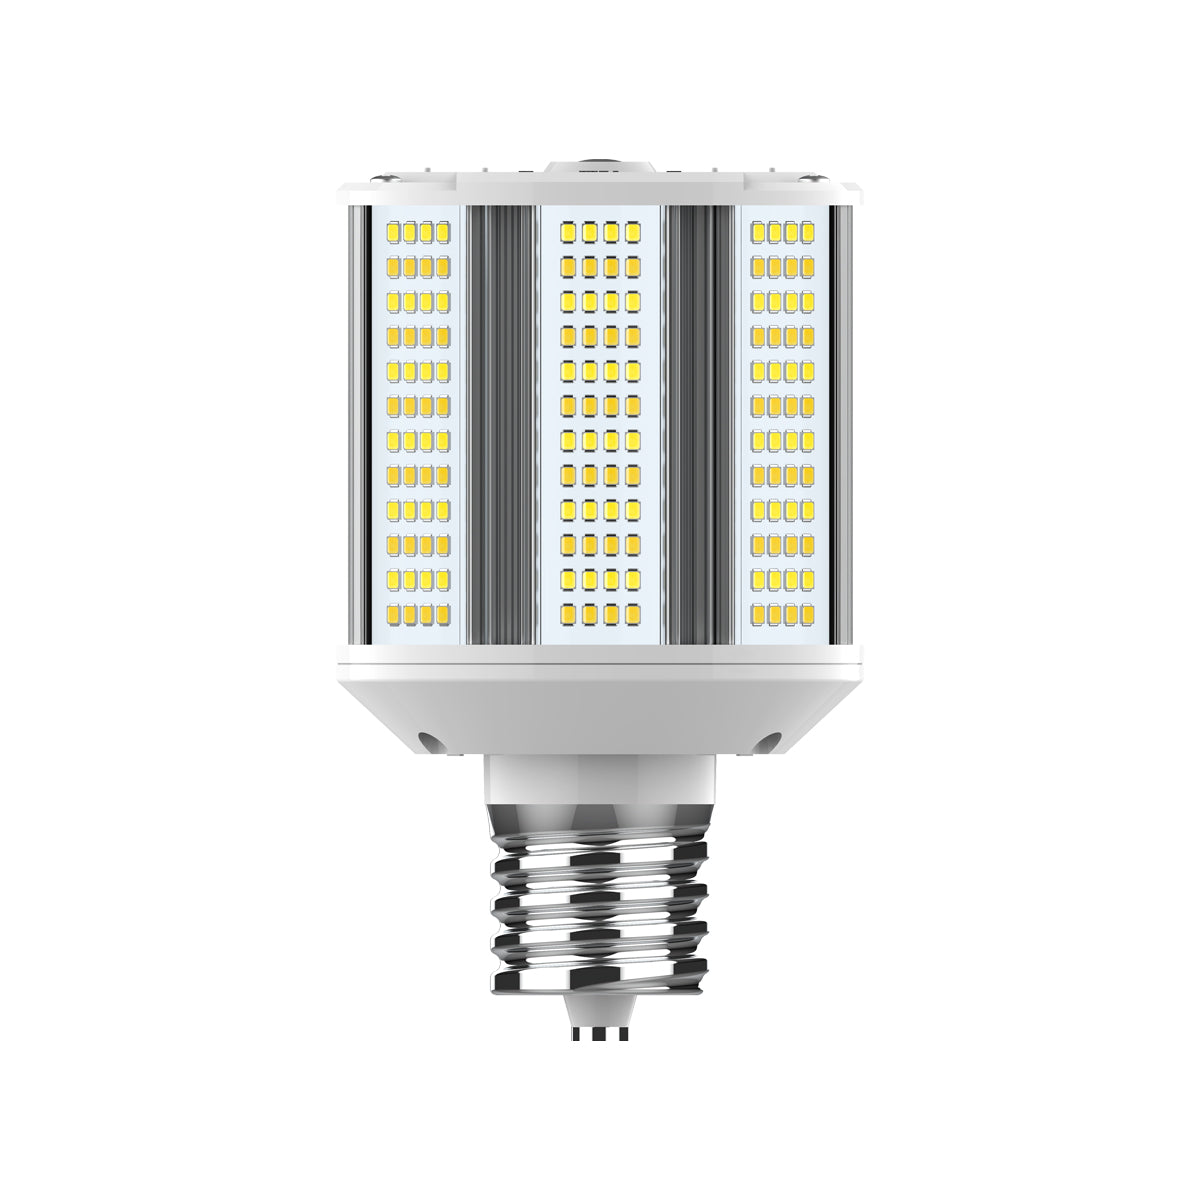 EIKO 12729 LPS20WP/8FCCT/EX39 LED HID Replacement Walpack Lamp 20/10/5W 3000/1500/750LM 80CRI 30/40/50K 120-277V EX39